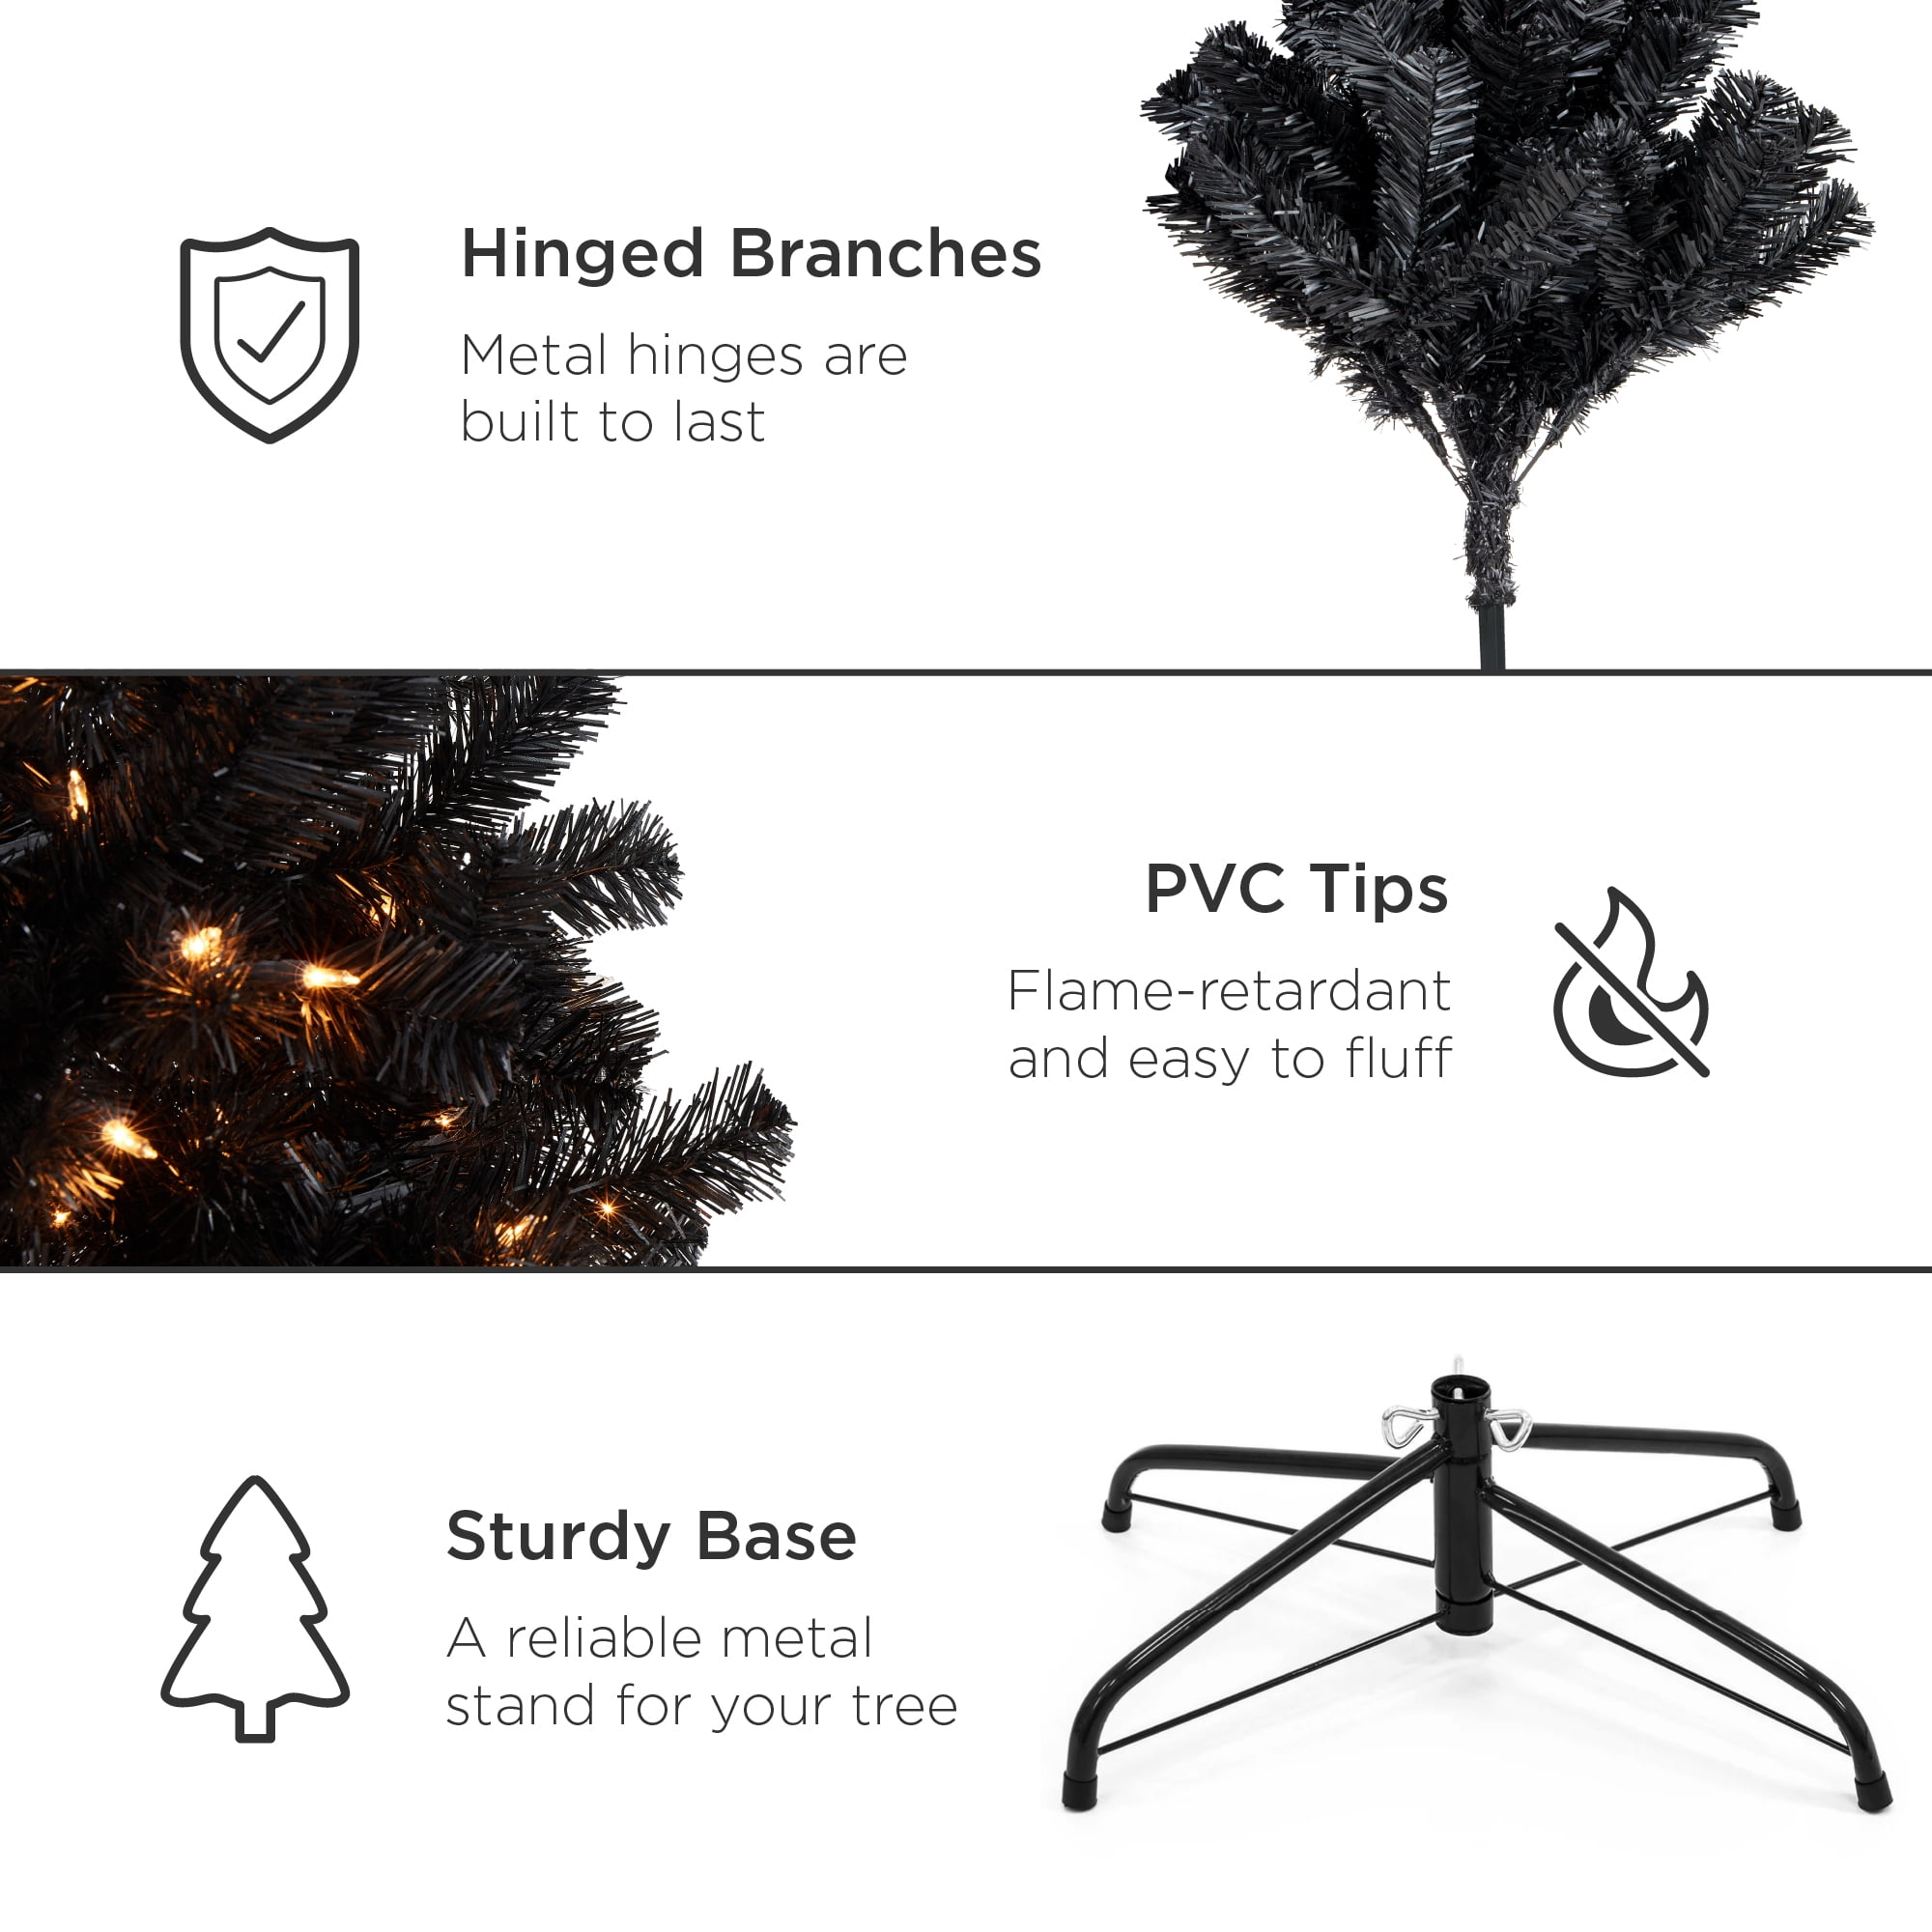 Black Christmas trees: Refined choice or sign of 2020 angst? - The